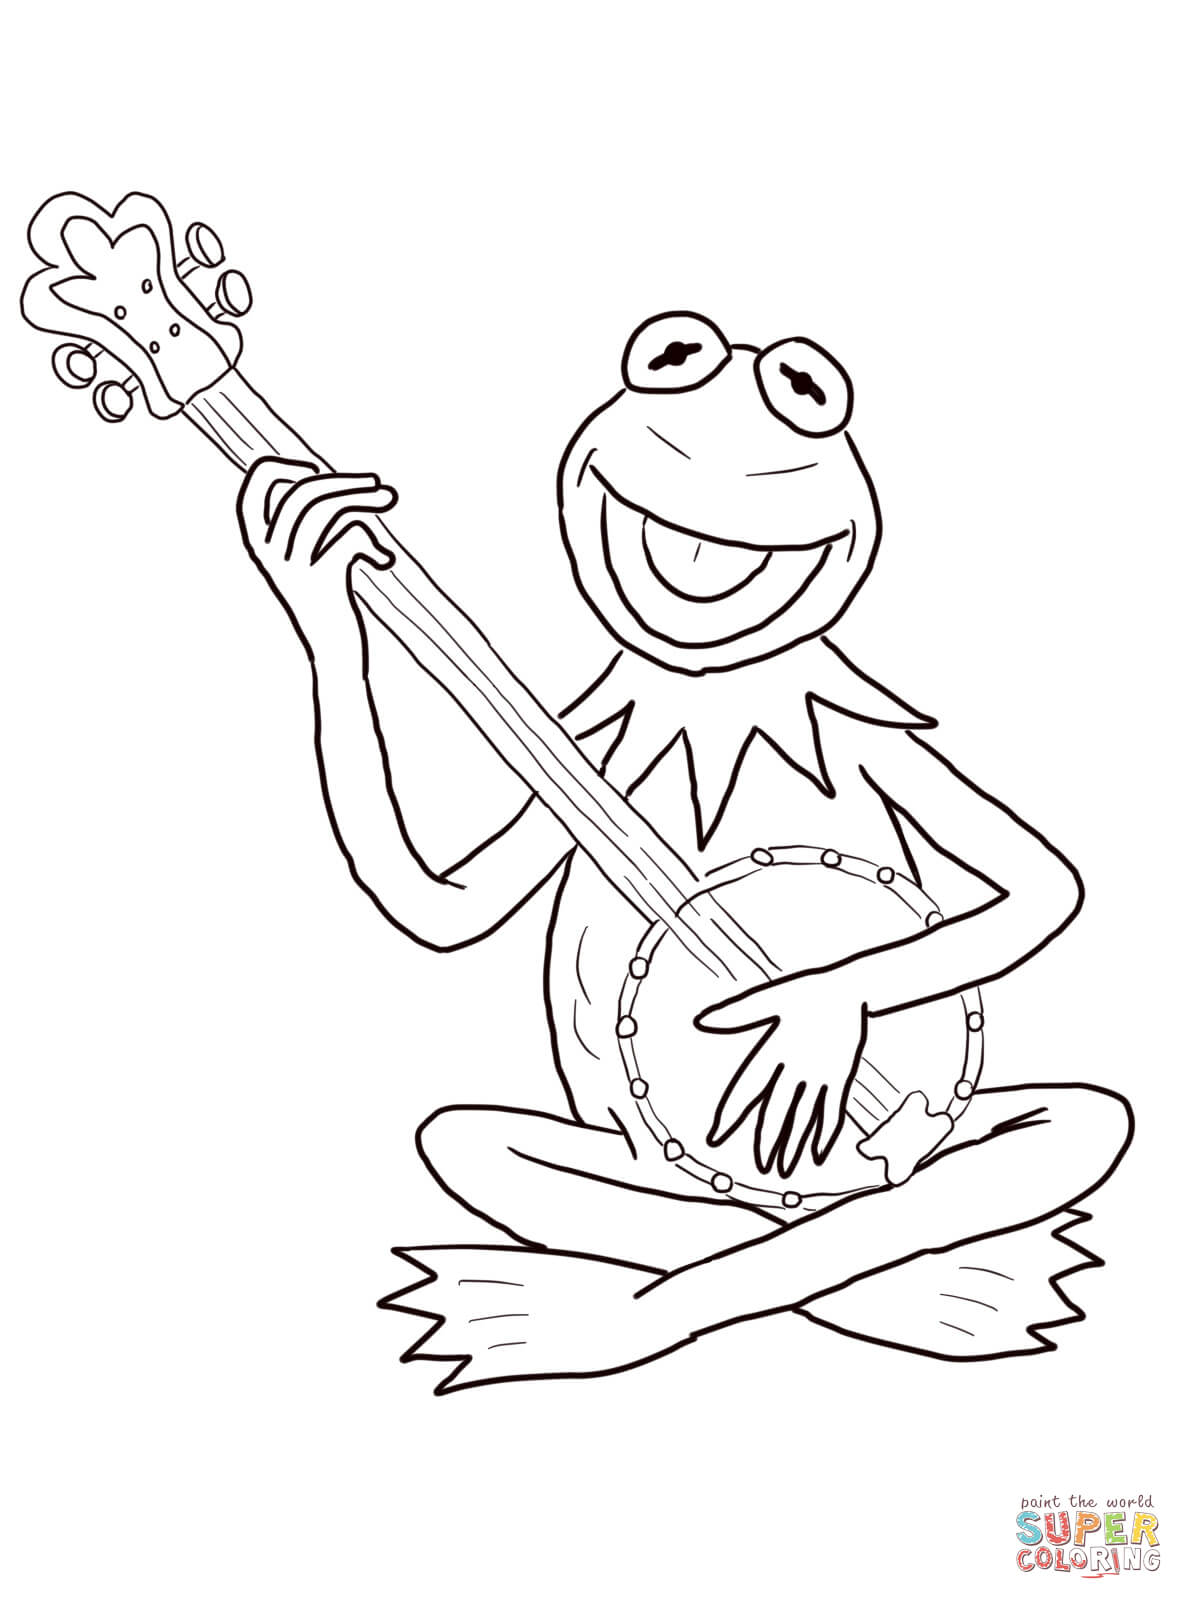 952 Cute Free Kermit The Frog Coloring Pages with disney character